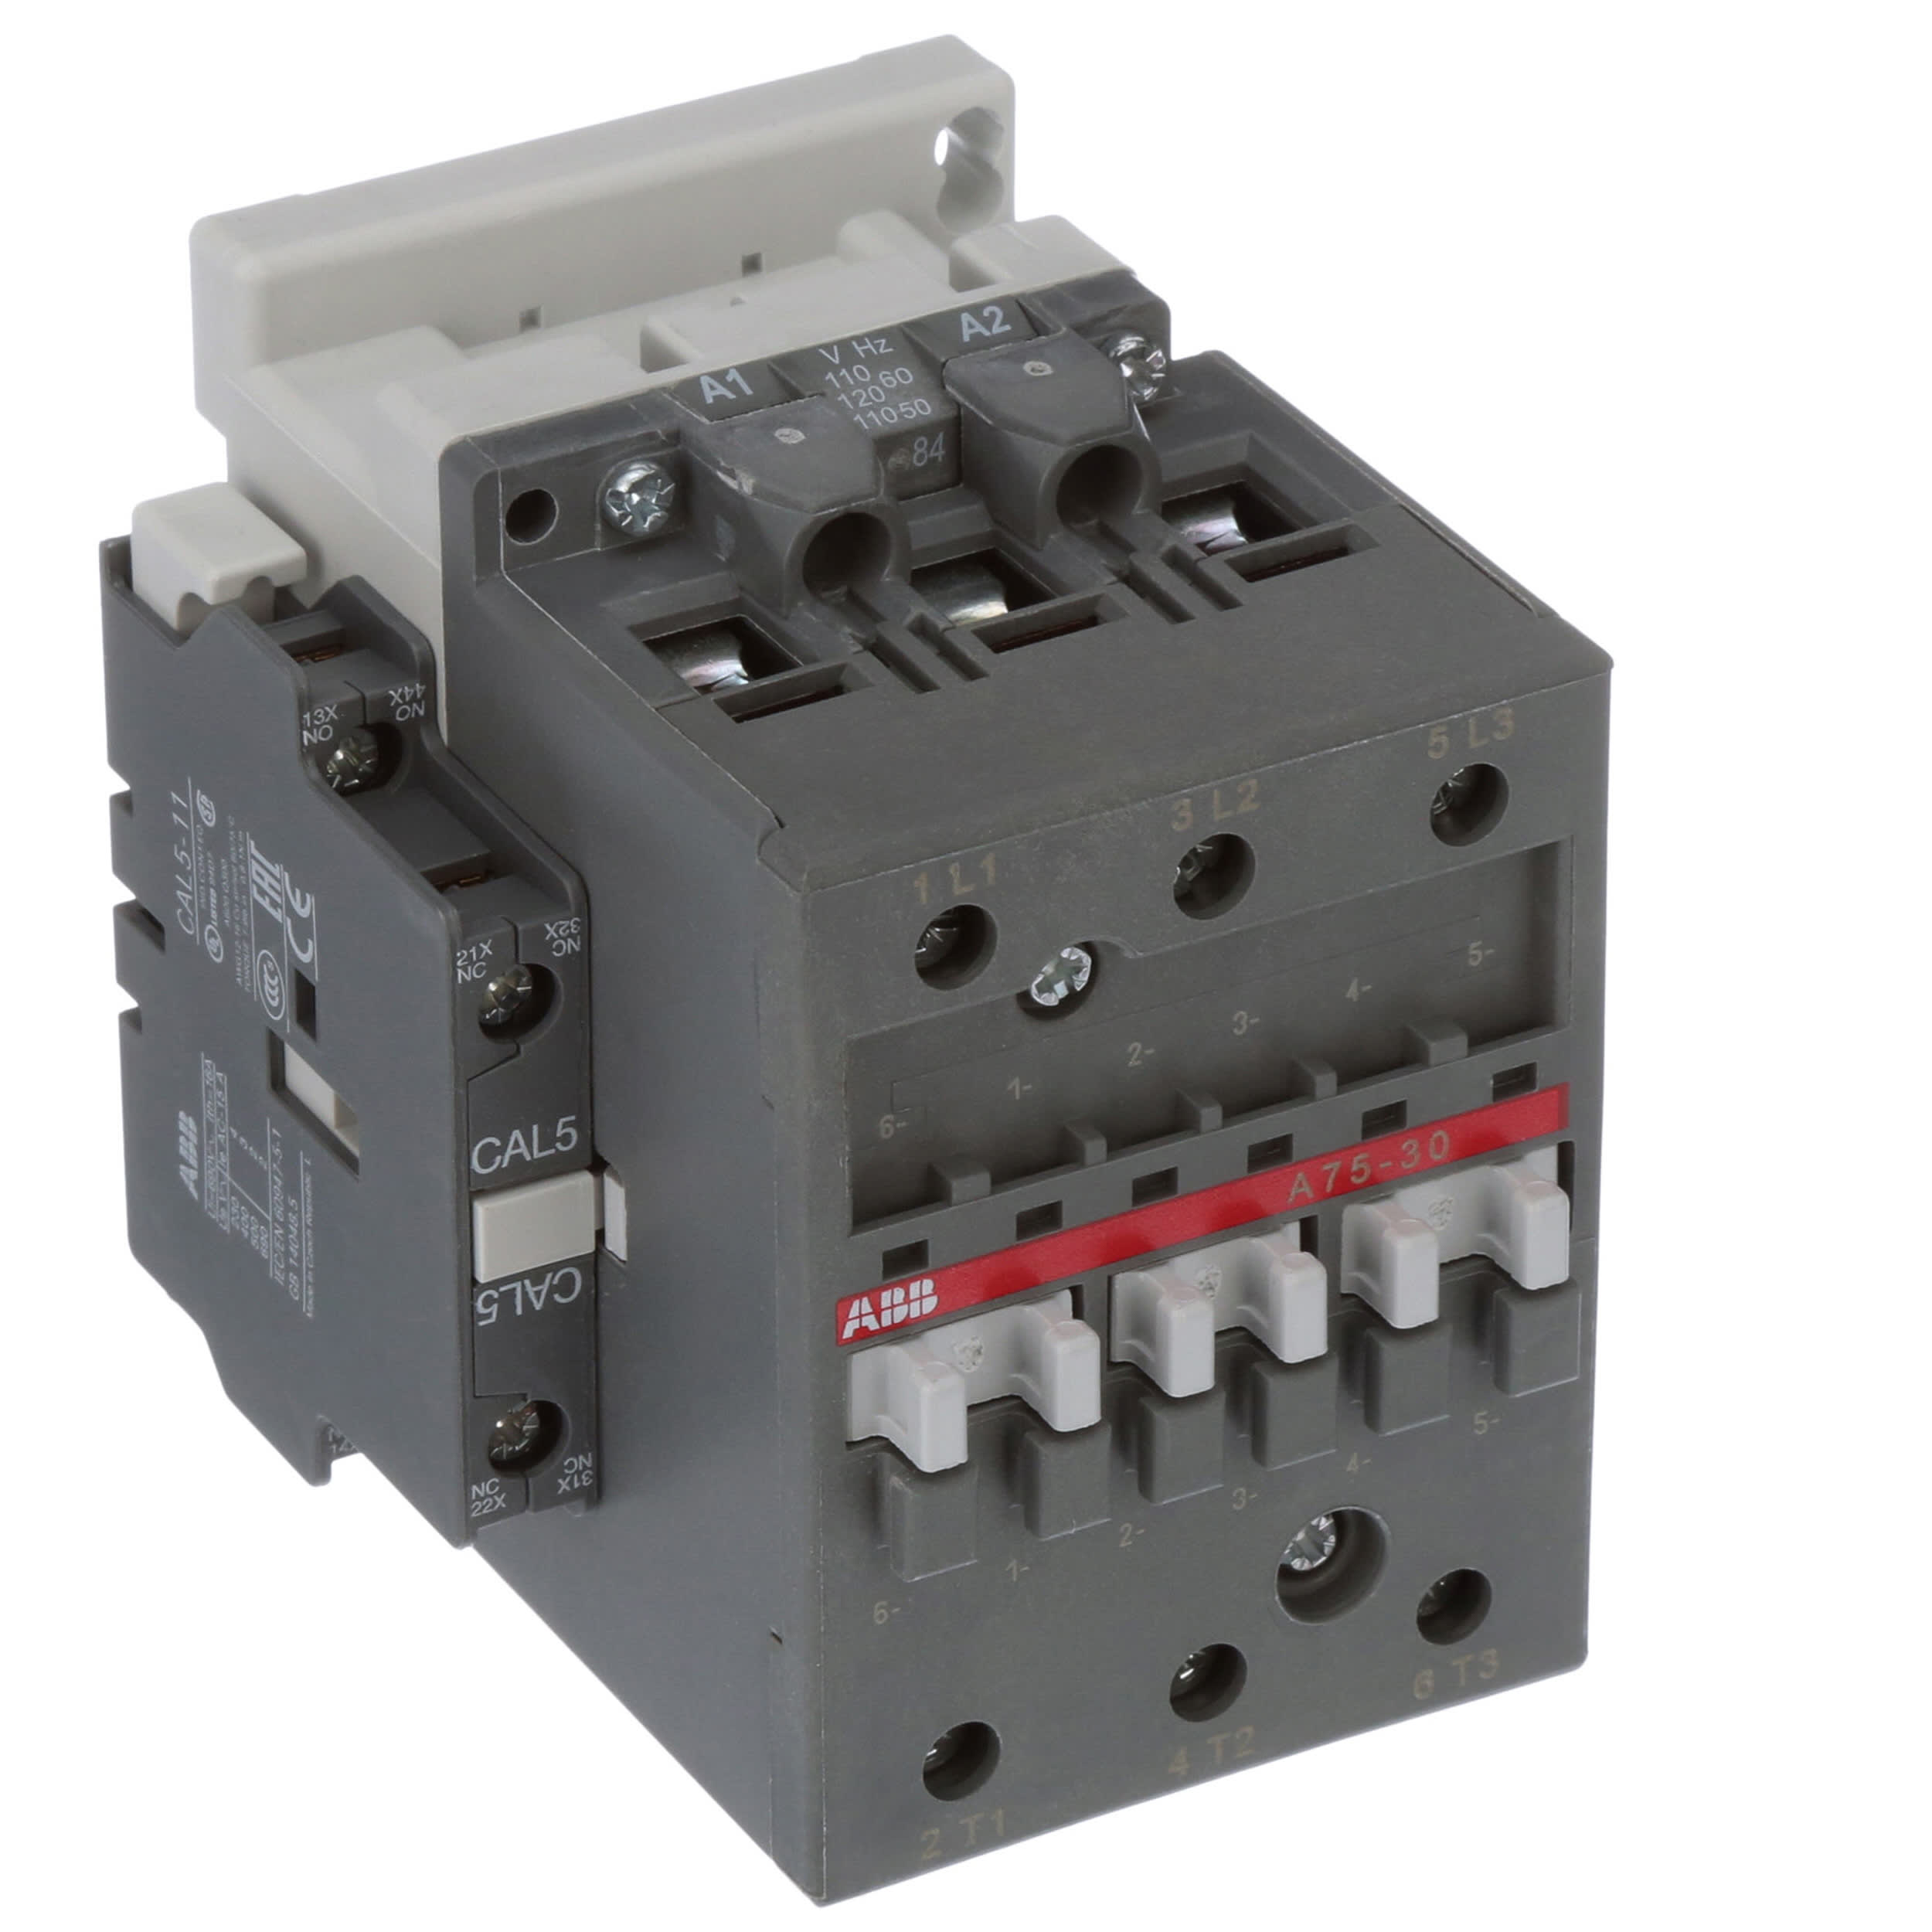 ABB Magnetic Contactor A75-30 A75-30-11 6110-99-751-9598 